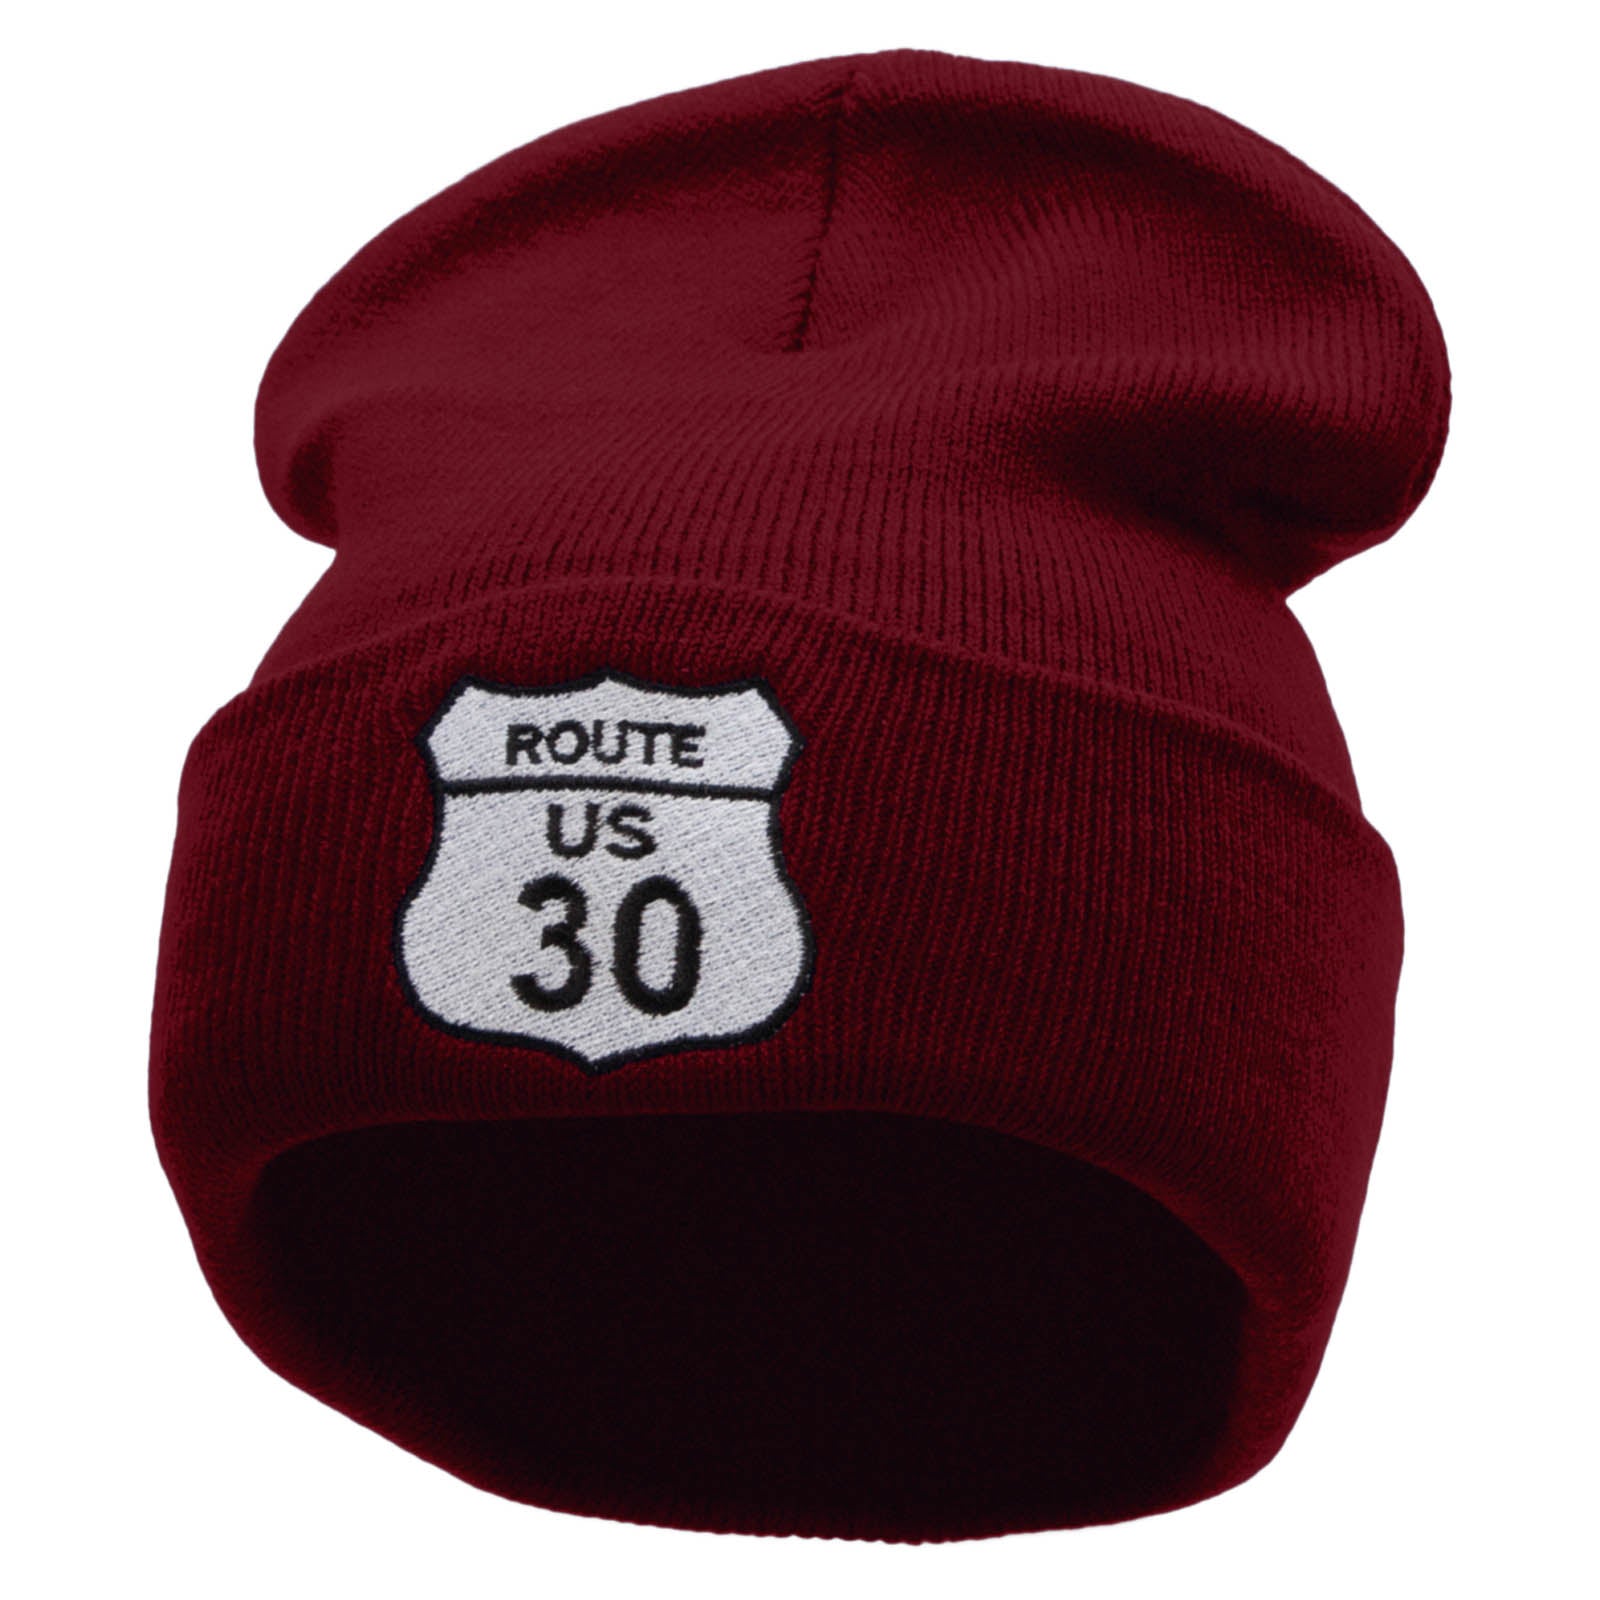 Route US 30 Embroidered 12 Inch Long Knitted Beanie - Maroon OSFM